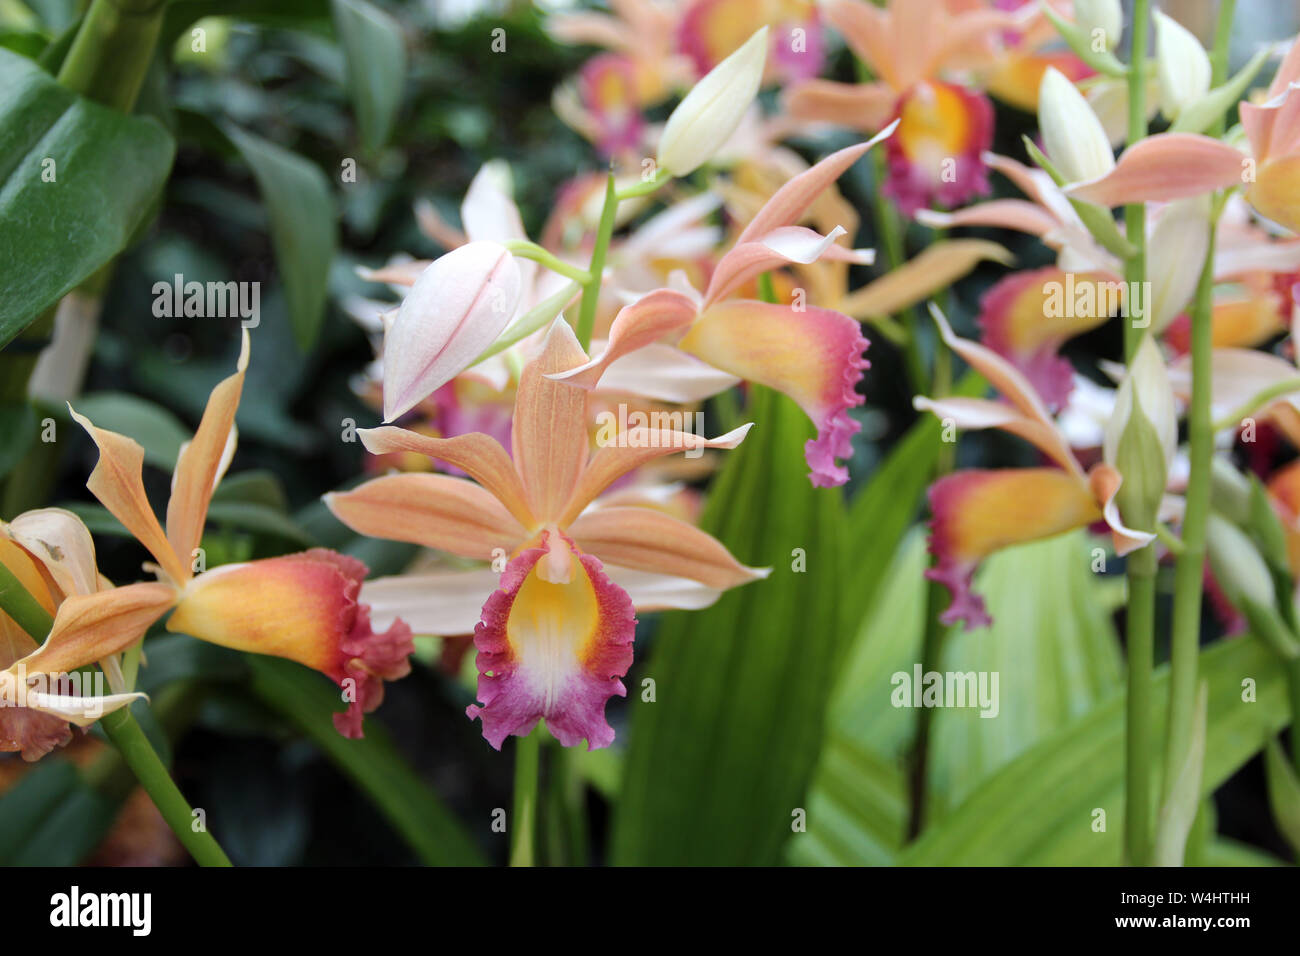 Close up of a group of blooming Phaius Dan Rosenberg Tropical Ice Orchids with a blurred background Stock Photo